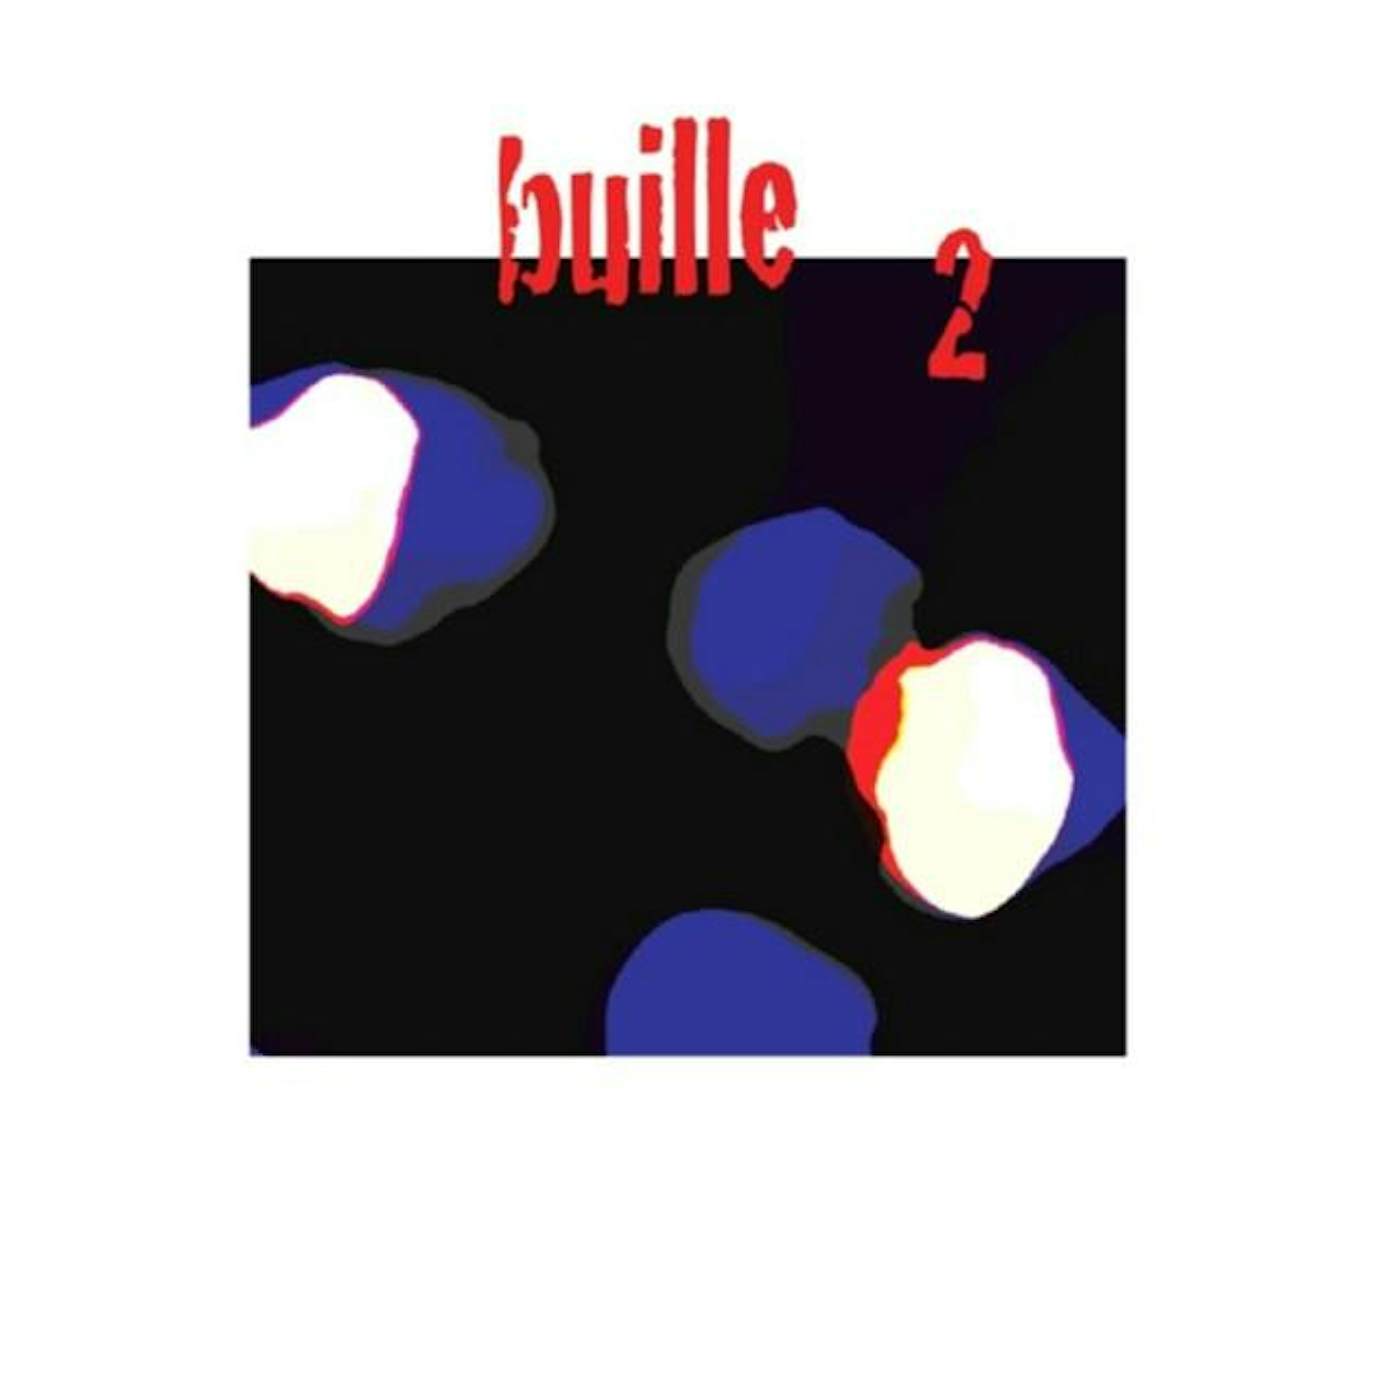 Buille